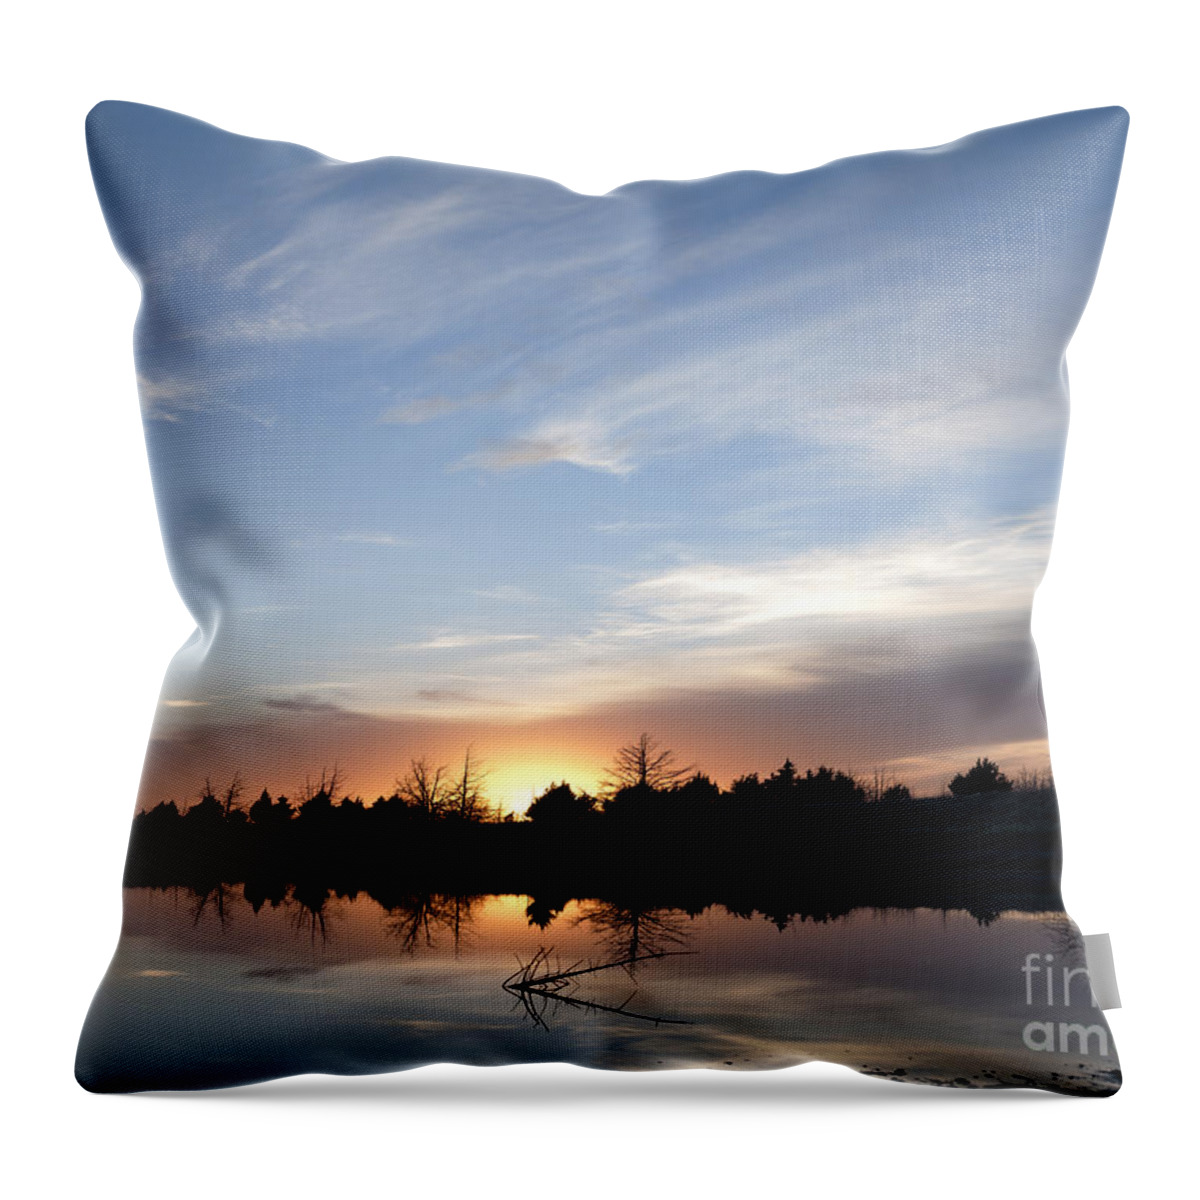 Sunset Throw Pillow featuring the photograph Reflected Sunset by Art Whitton